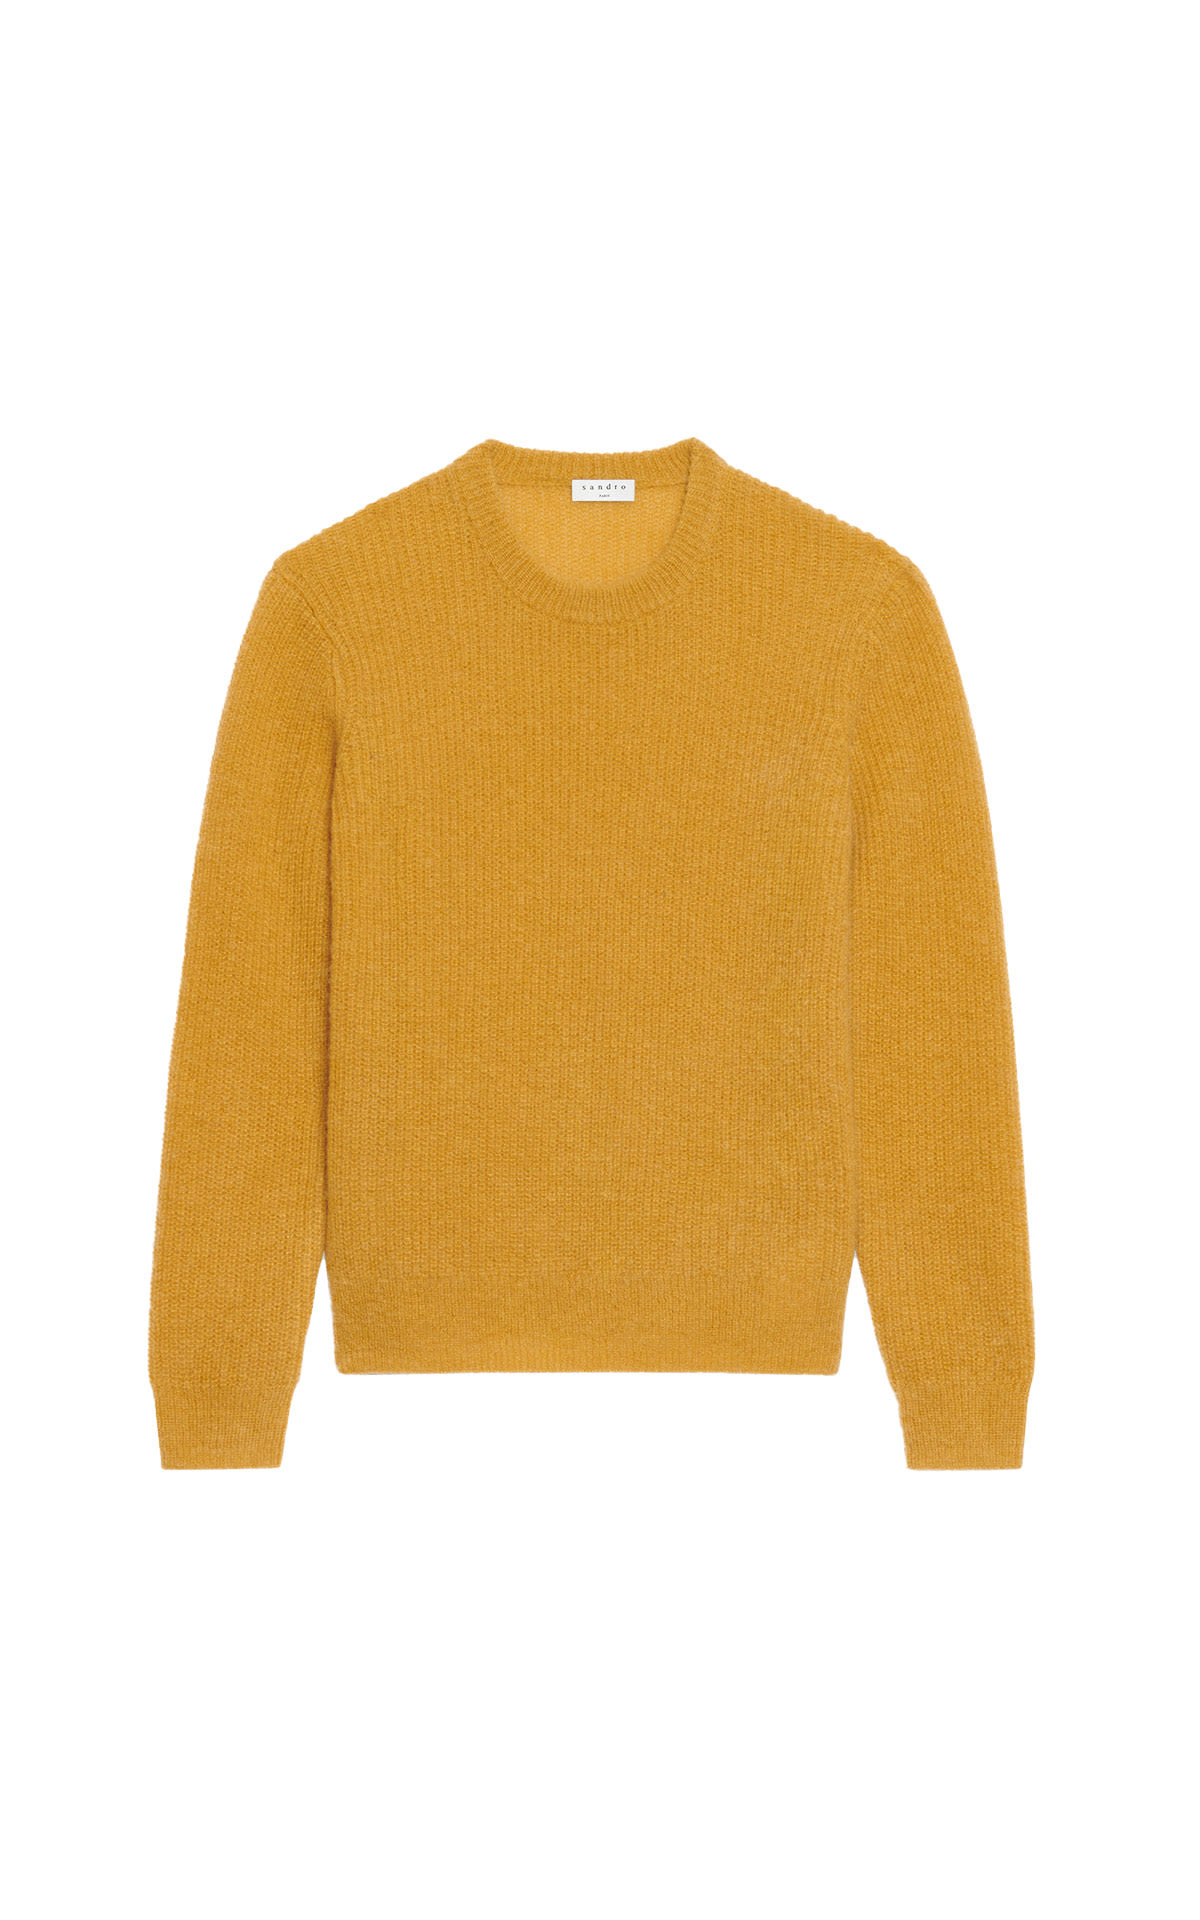 Sandro Mohair sweater from Bicester Village